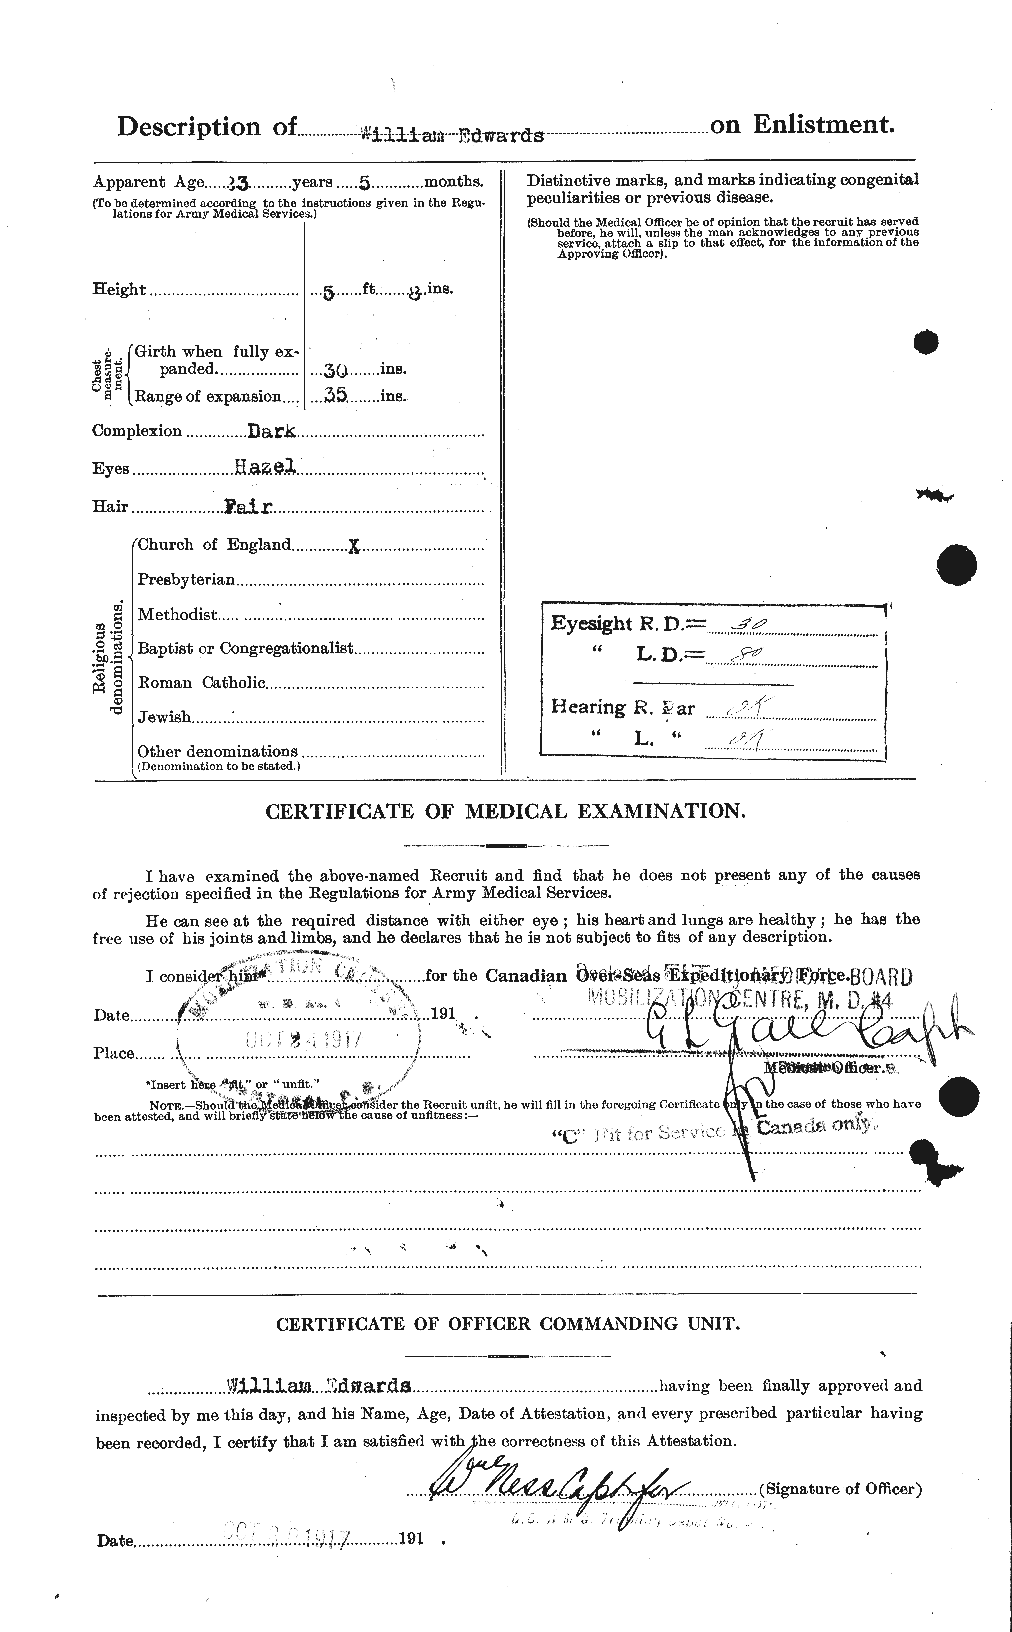 Personnel Records of the First World War - CEF 310389b